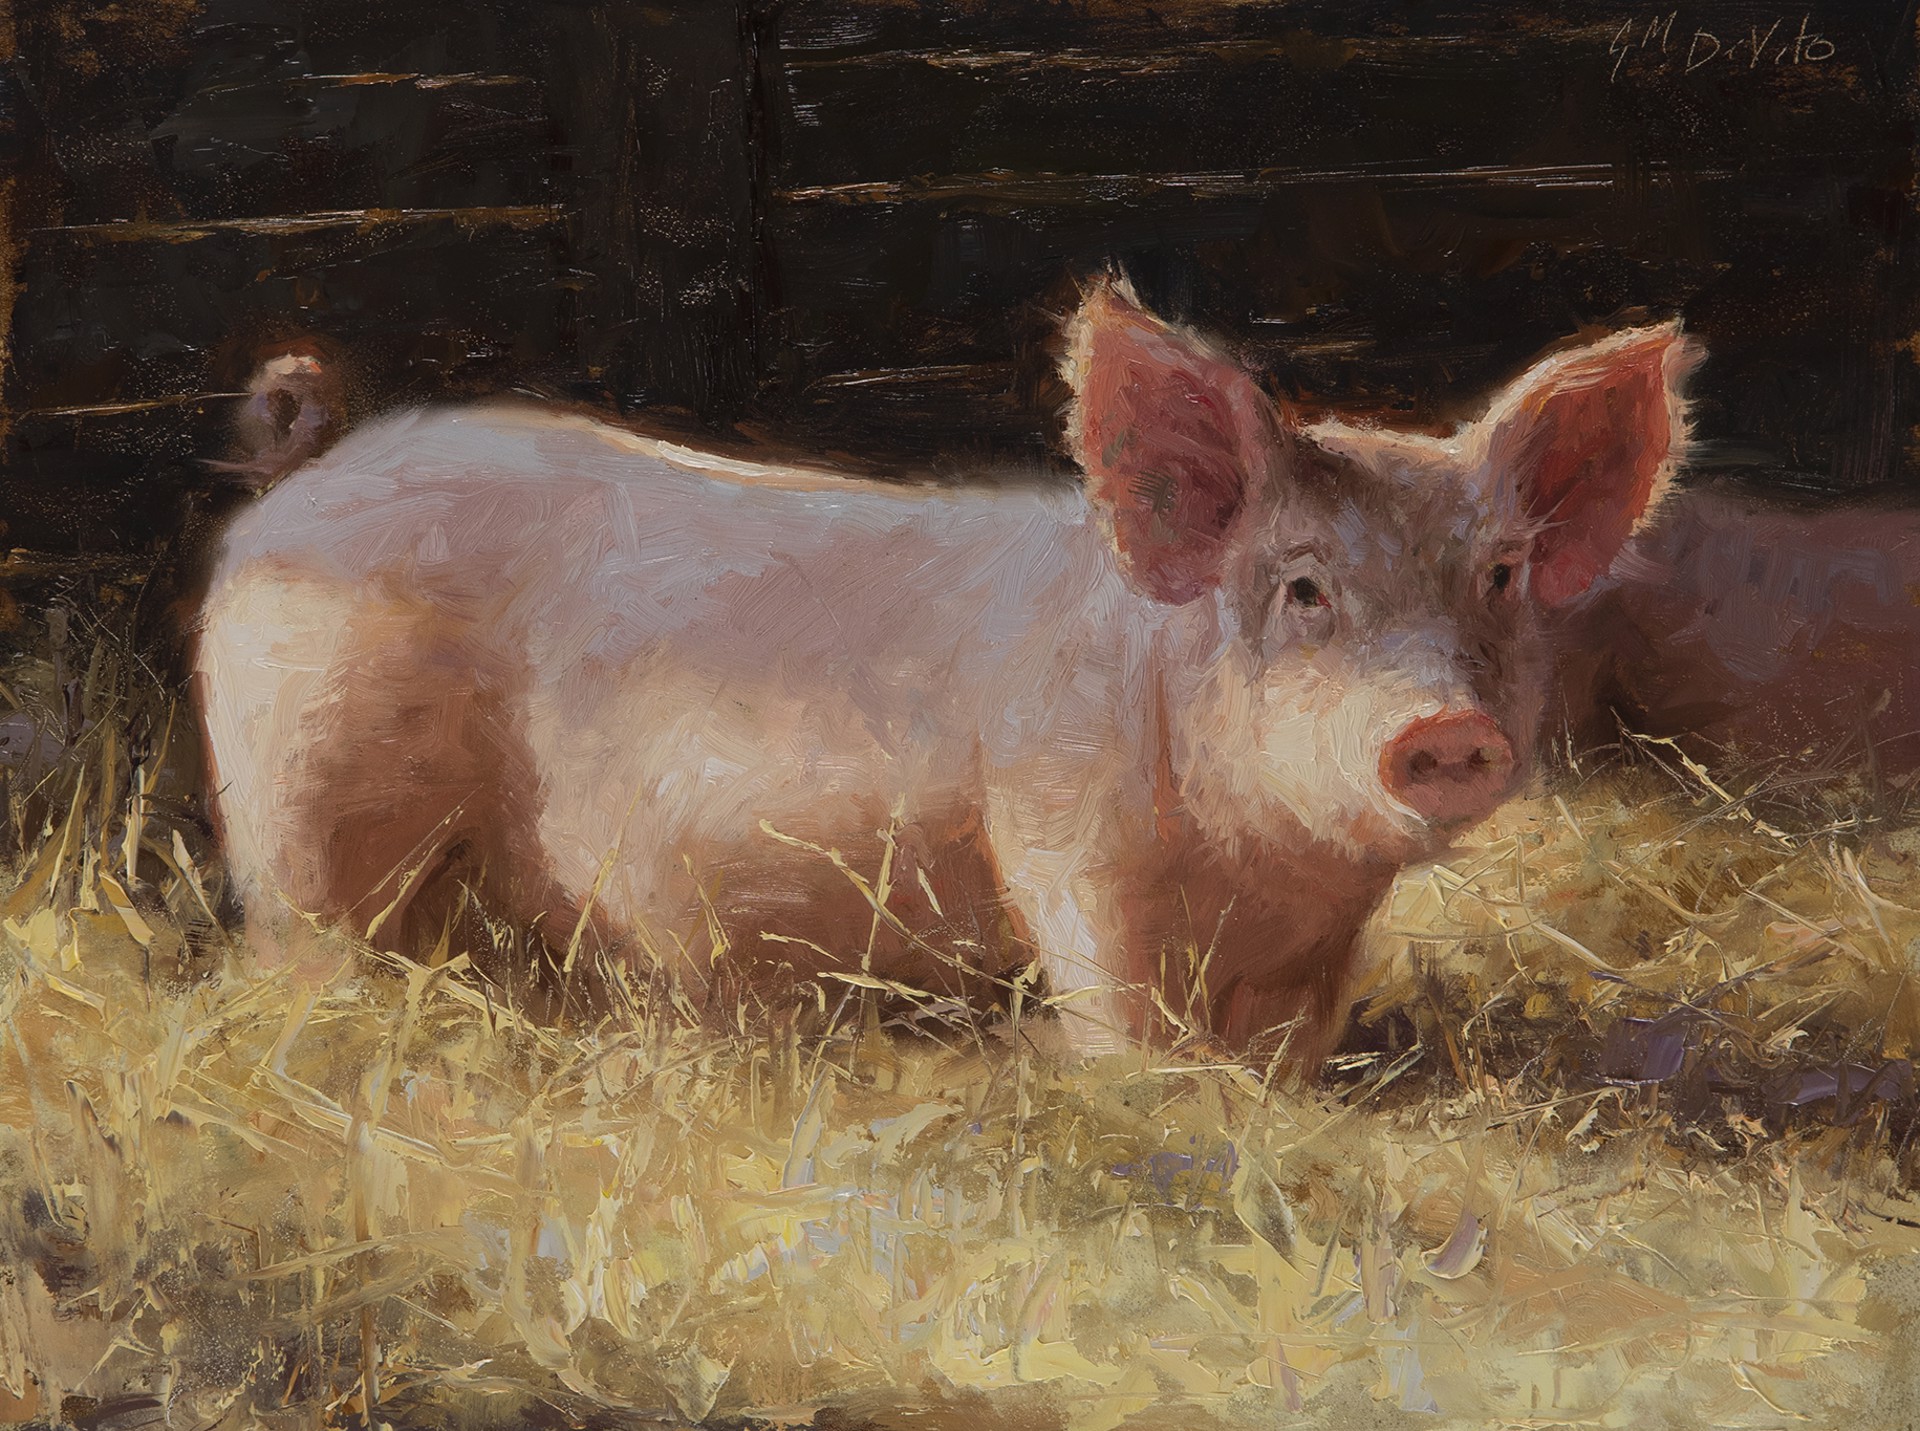 Pig in Sunlight by Grace Devito